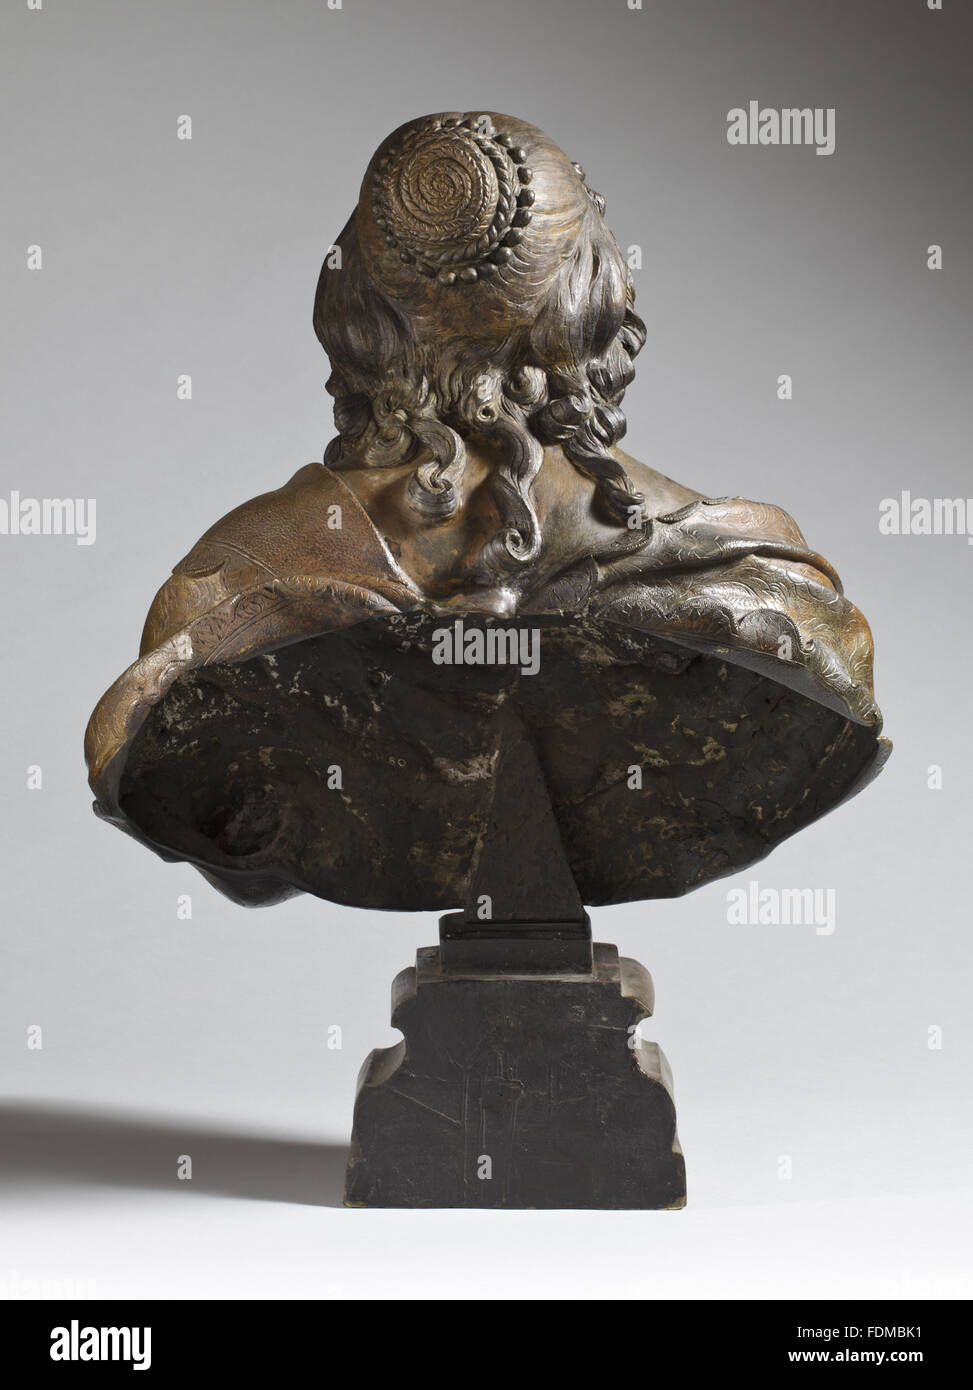 The reverse of a gilt bronze bust of Katherine Bruce, Mrs Murray, d.1649, by Hubert Le Sueur (c.1580 - London 1670), 1635, mounted on a scroll-shaped socle cast with the Bruce crest, a tree issuing from an earl's coronet, at Ham House, Surrey. Stock Photo